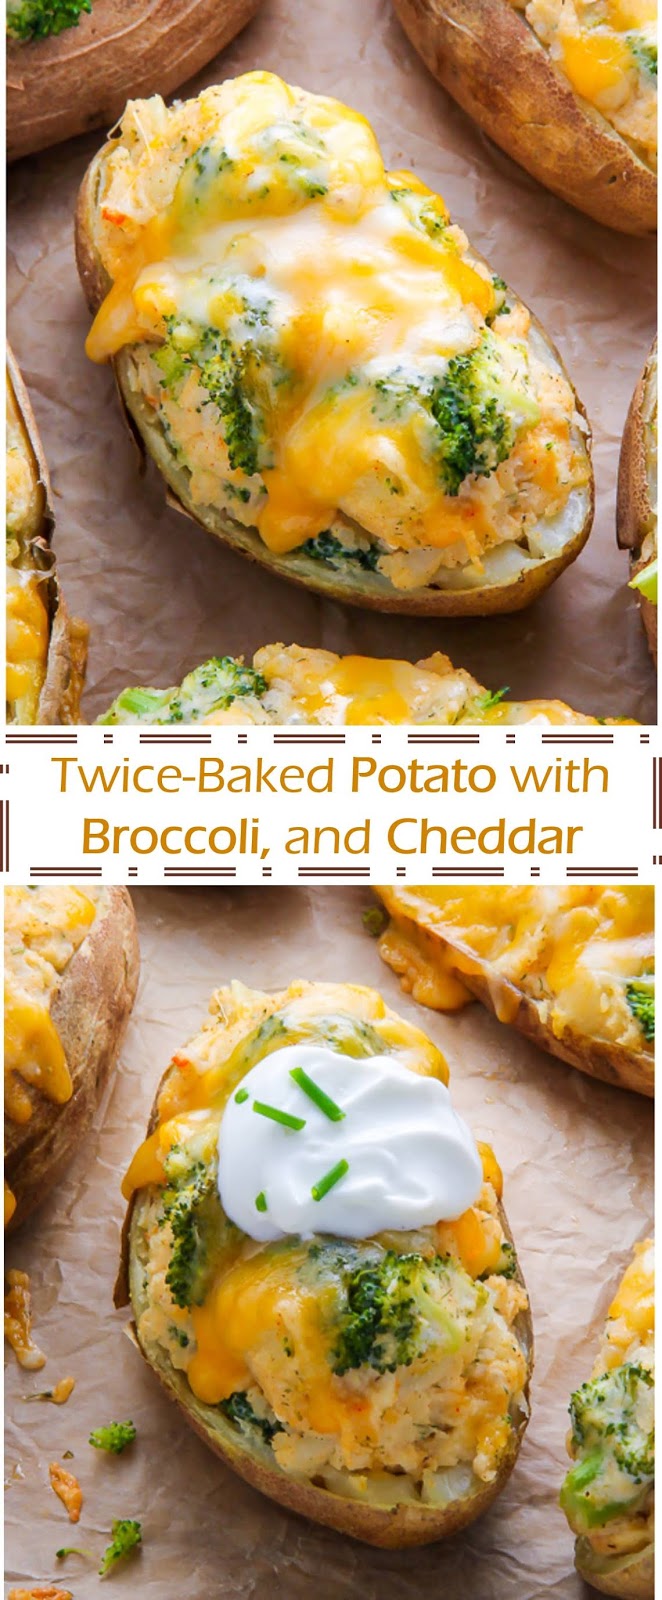 269 Reviews: My BEST #Recipes >> Twice-Baked #Potato with Broccoli and ...